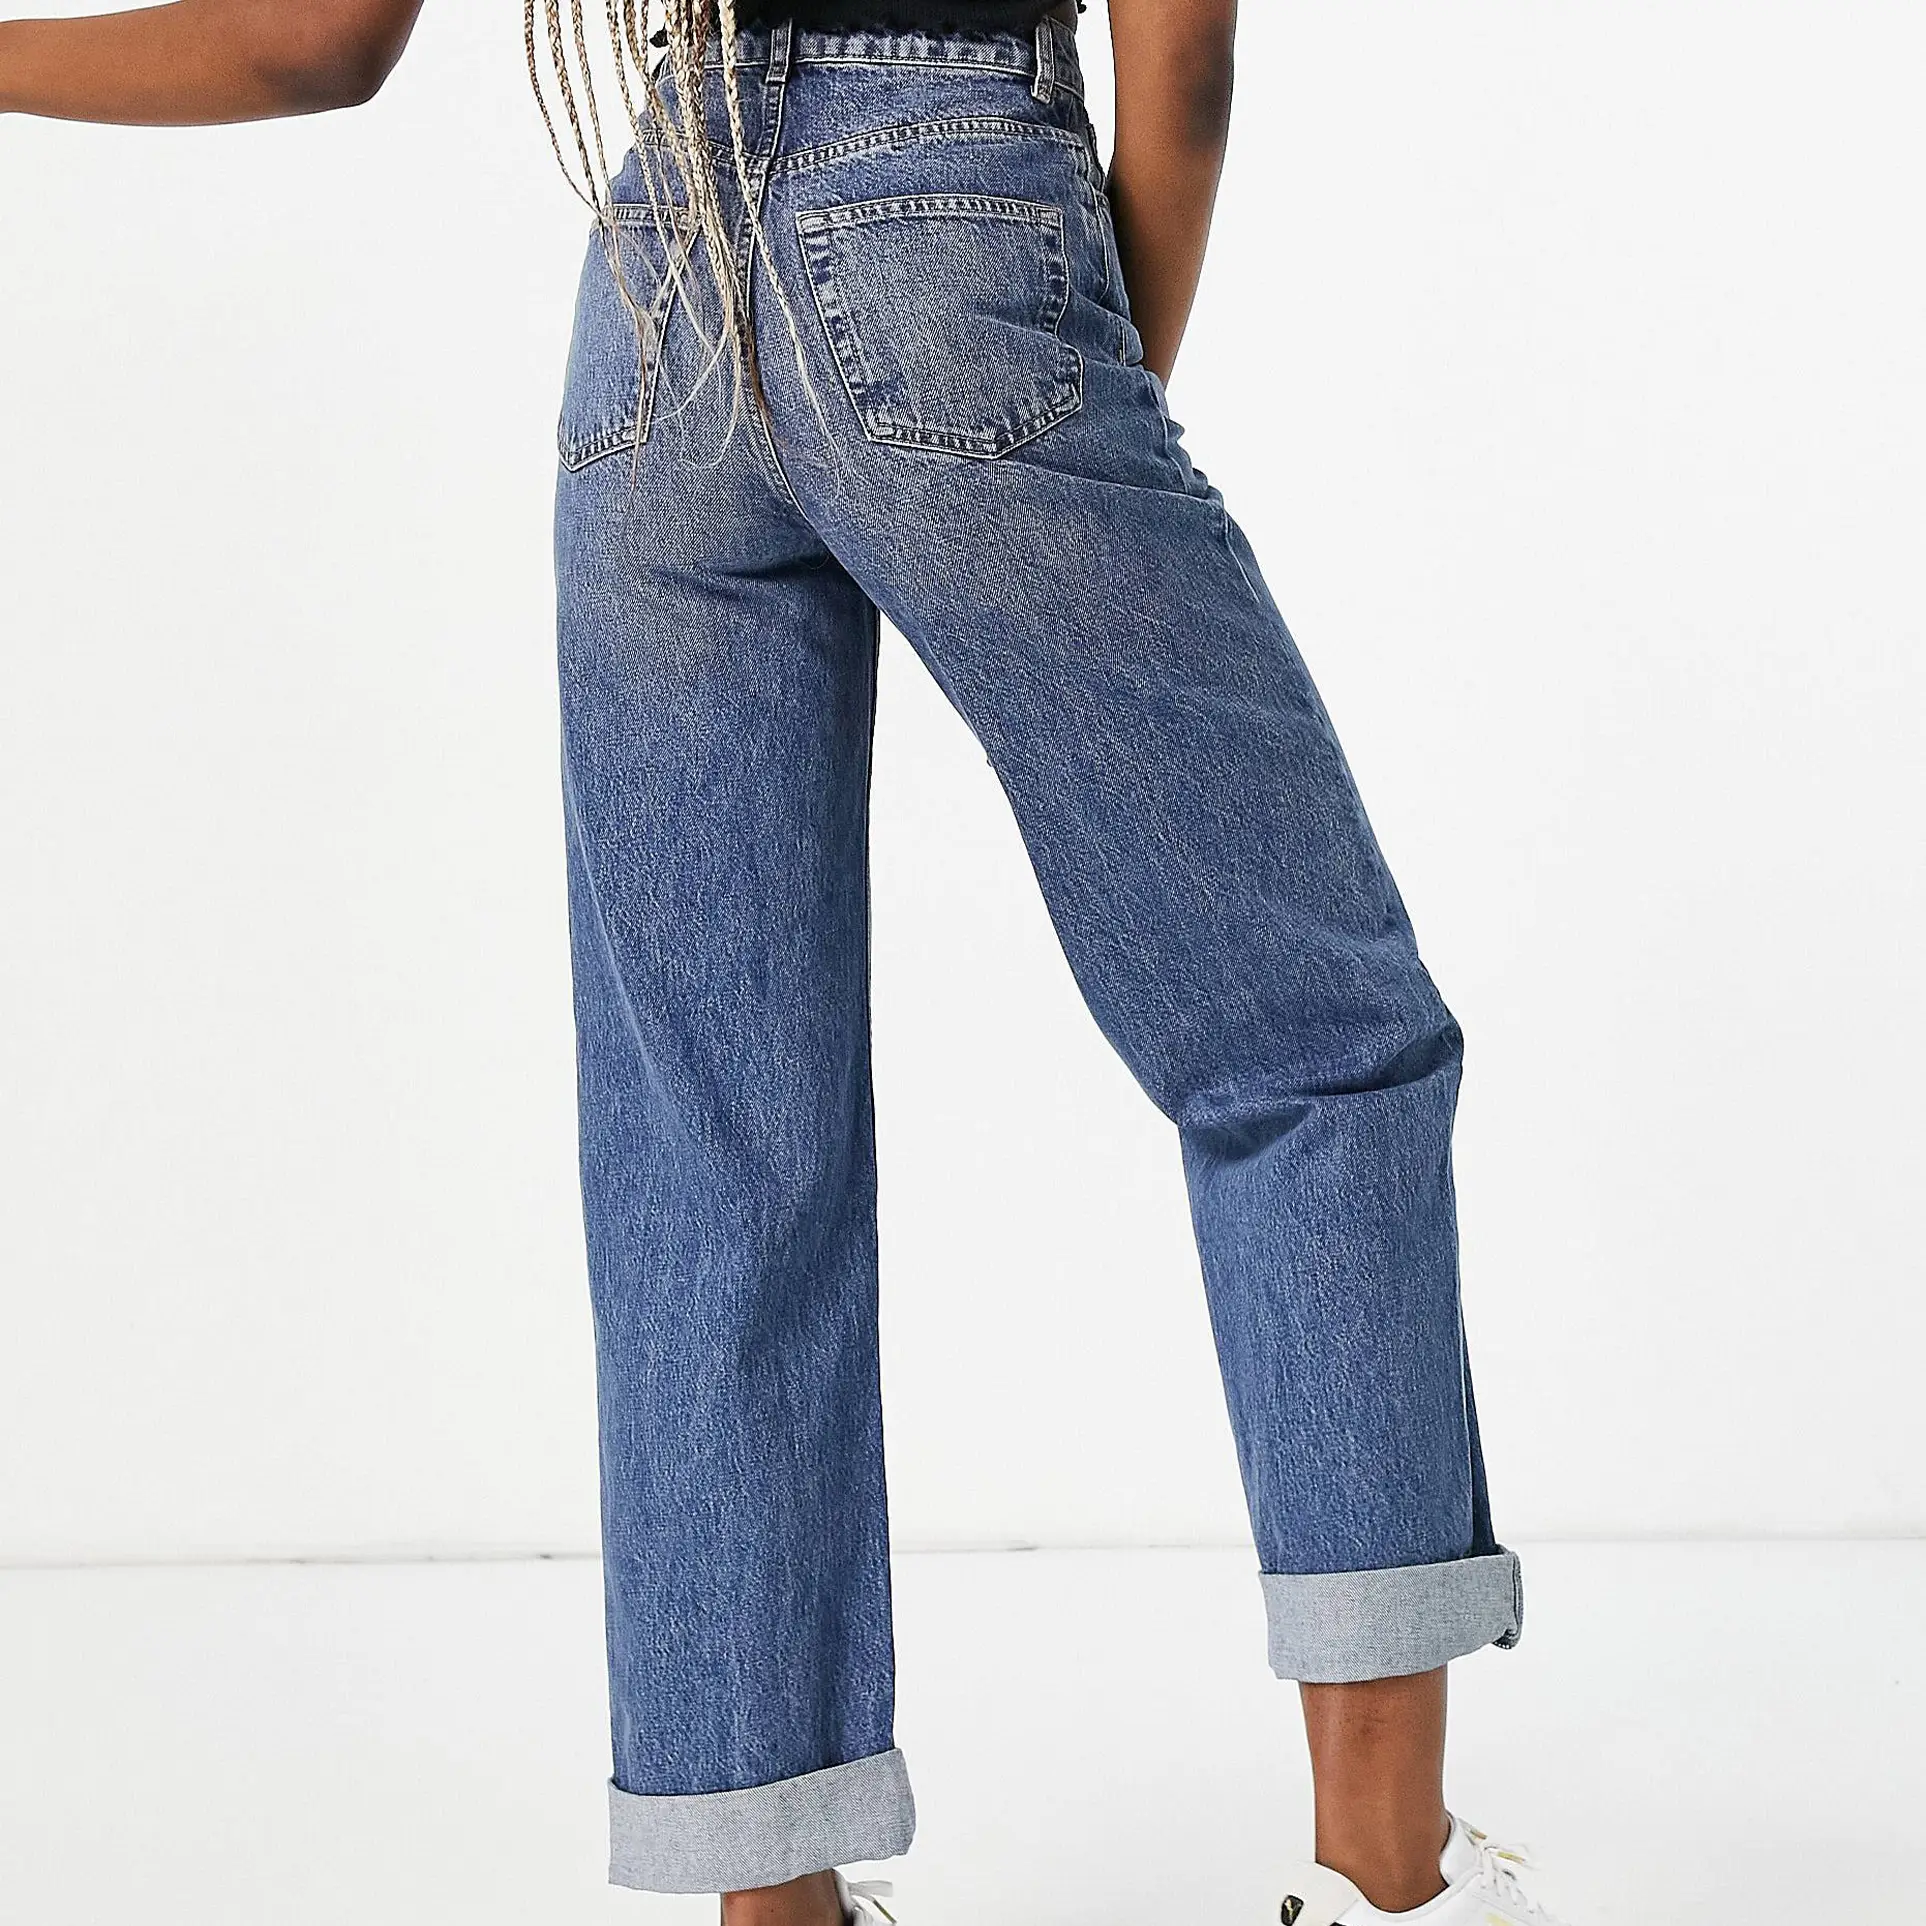 The Best Jeans For Tall Women